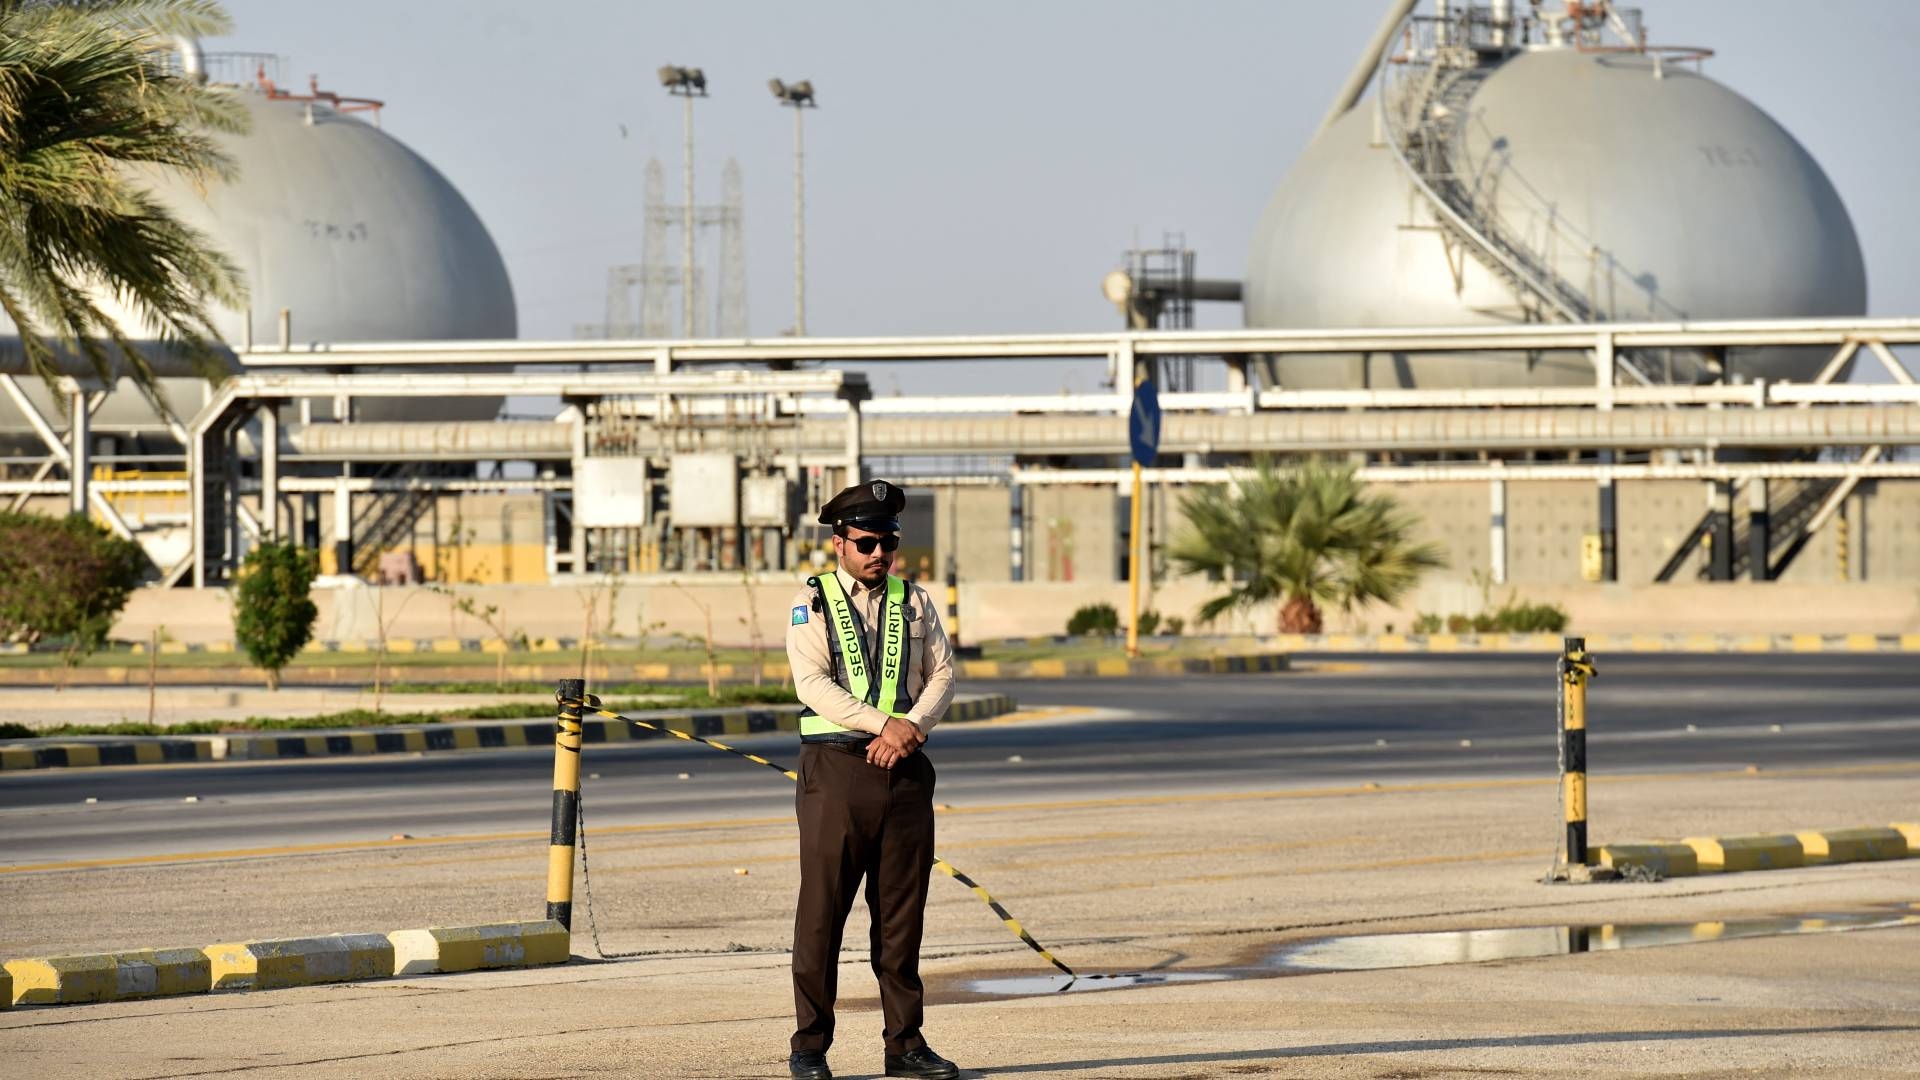 A security officer stands guard at the entrance of Saudi Arabia's Abqaiq oil processing plant on 20 September 2019